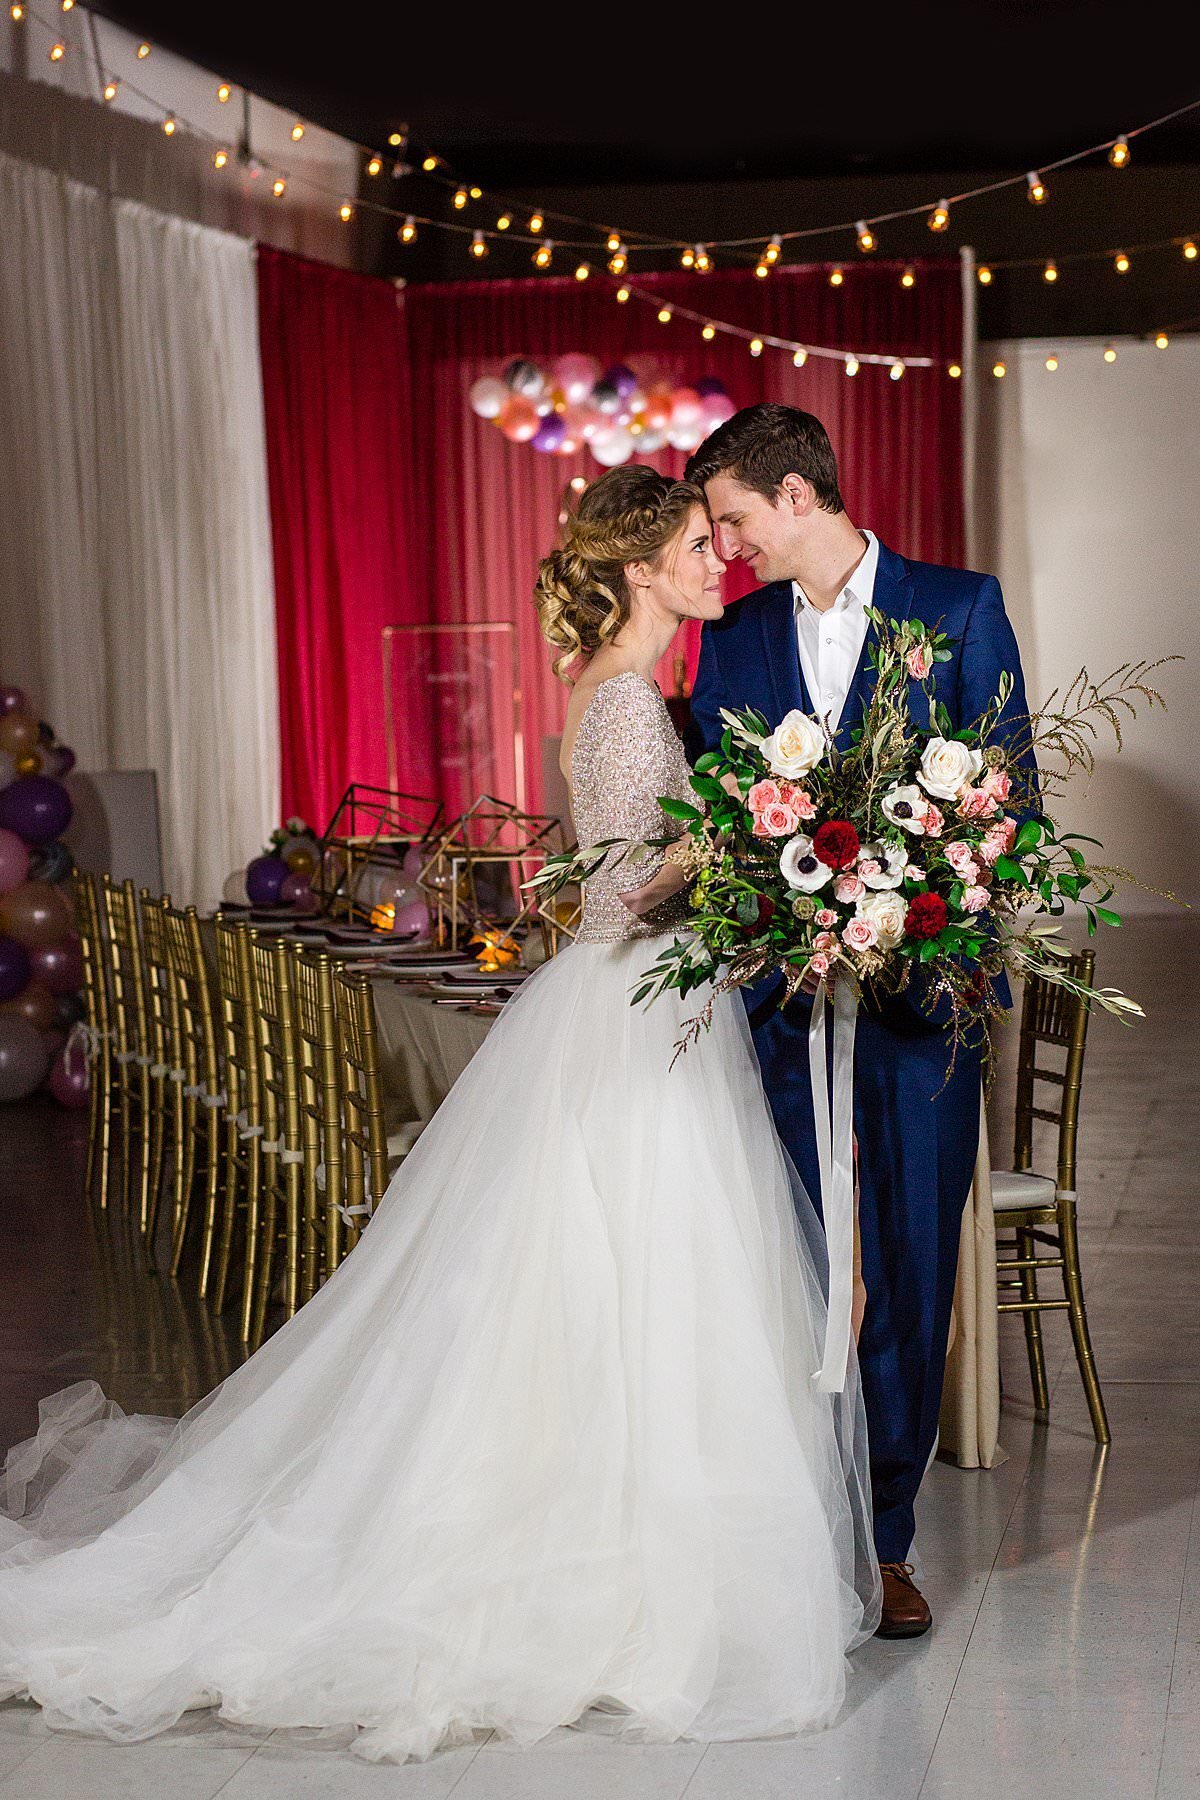 Bride in sequin top with tulle skirt nose-to-nose with groom who's wearing a blue suit holding an oversized maroon and greenery bouquet